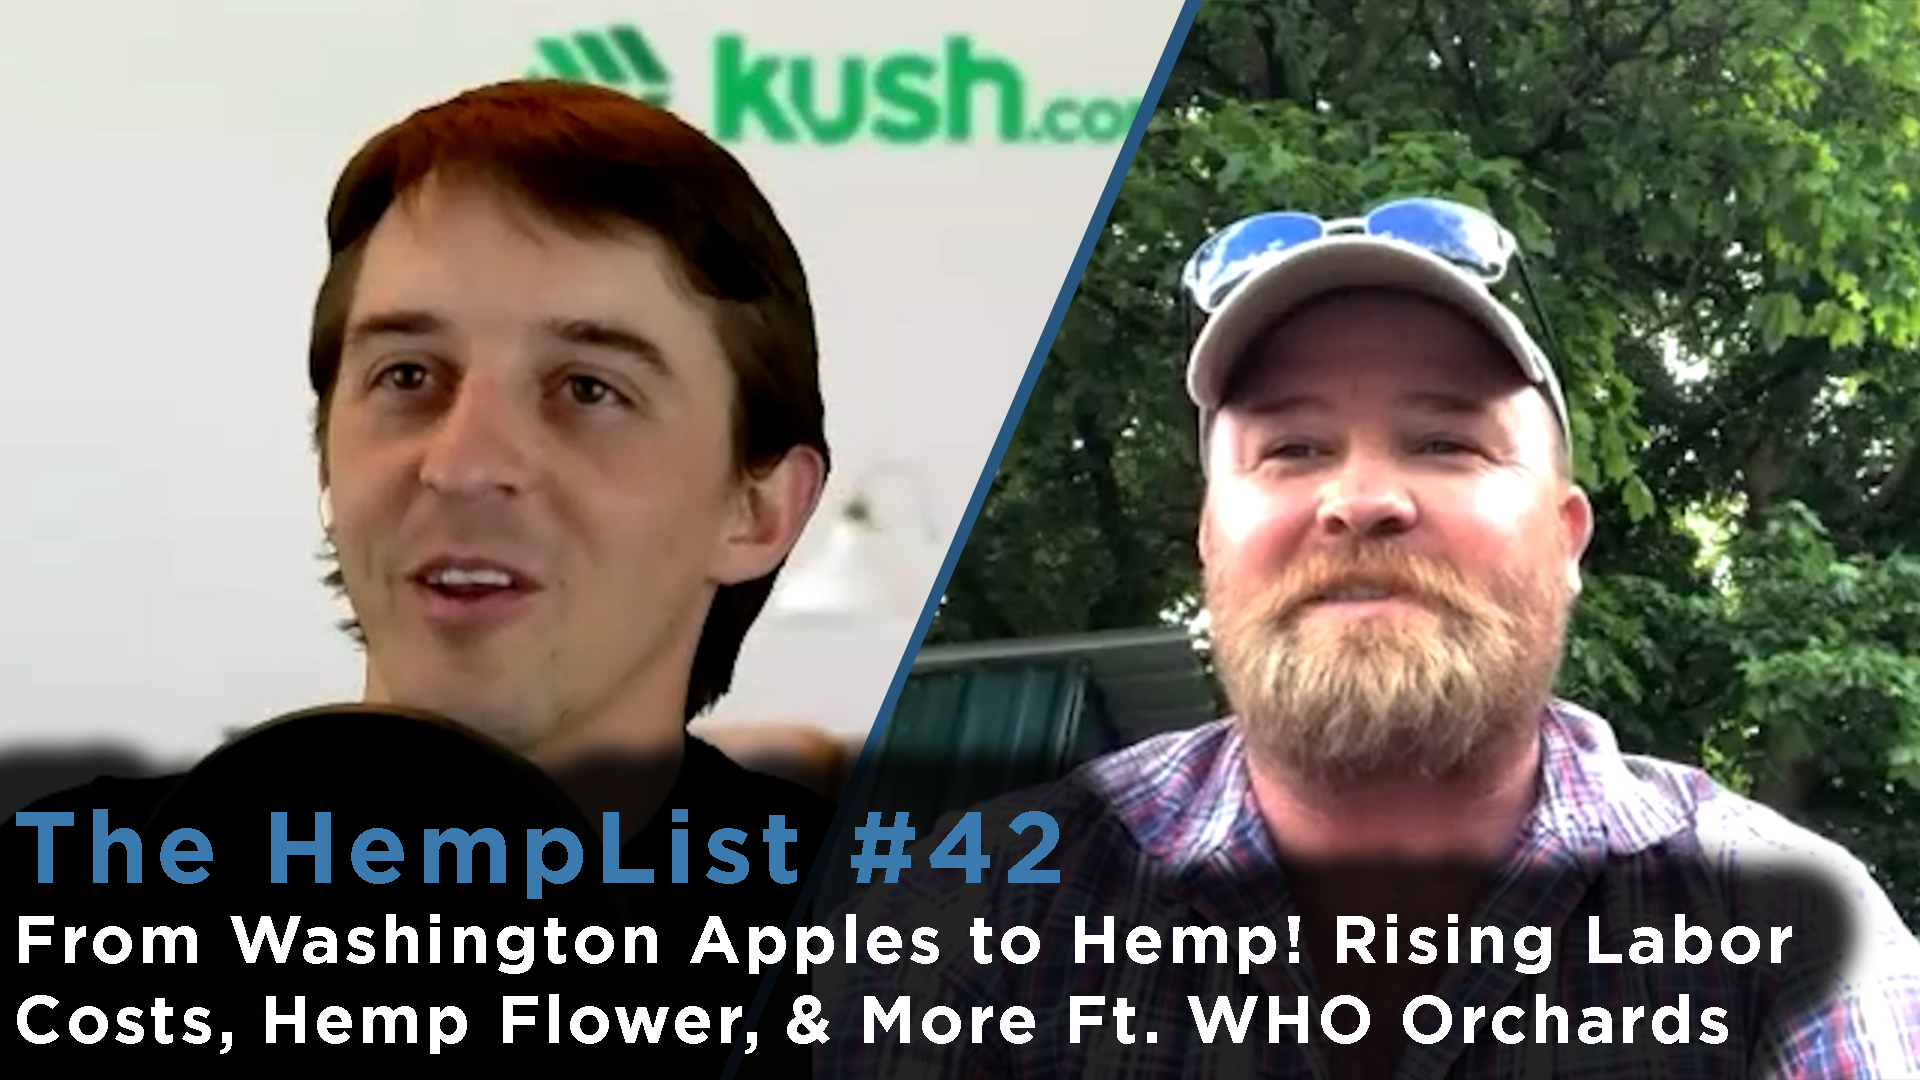 The HempList #42: From Washington Apples to Hemp! Rising Labor Costs, Hemp Flower, & More Ft. WHO Orchards